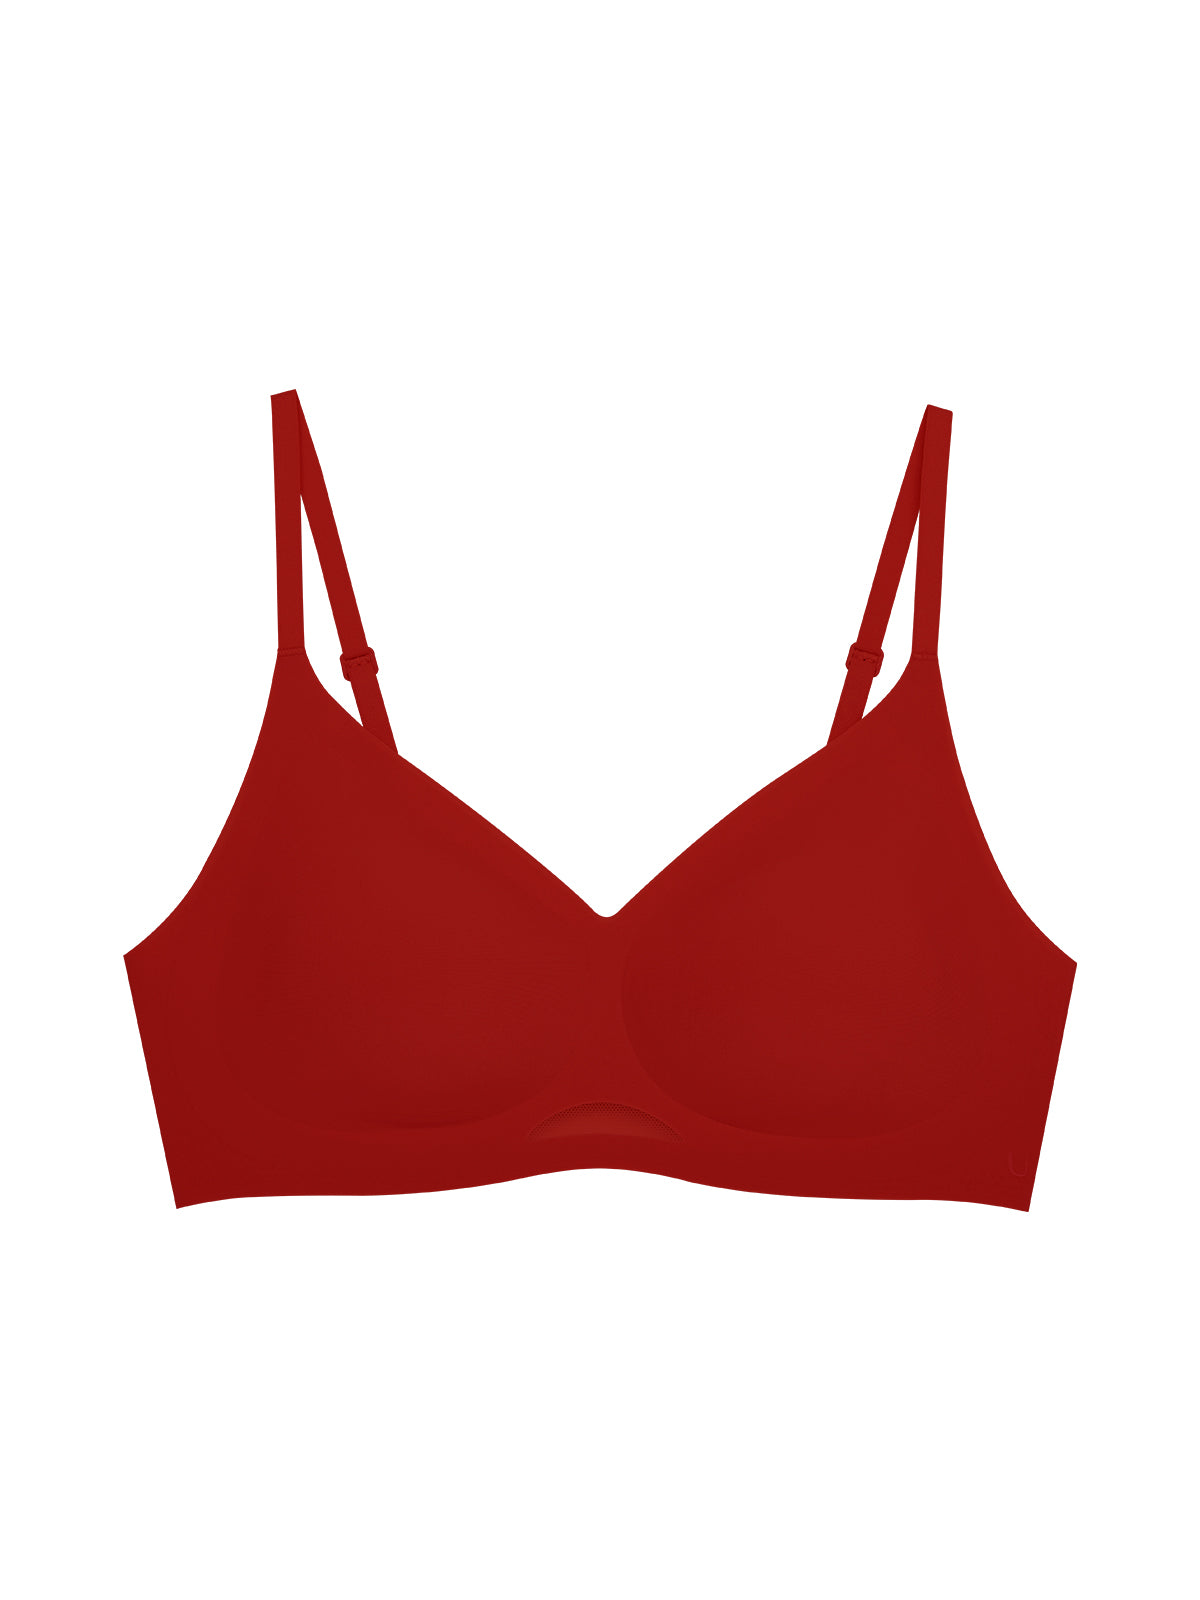 Red Bra Size 80B. Isolate On White. Stock Photo, Picture and